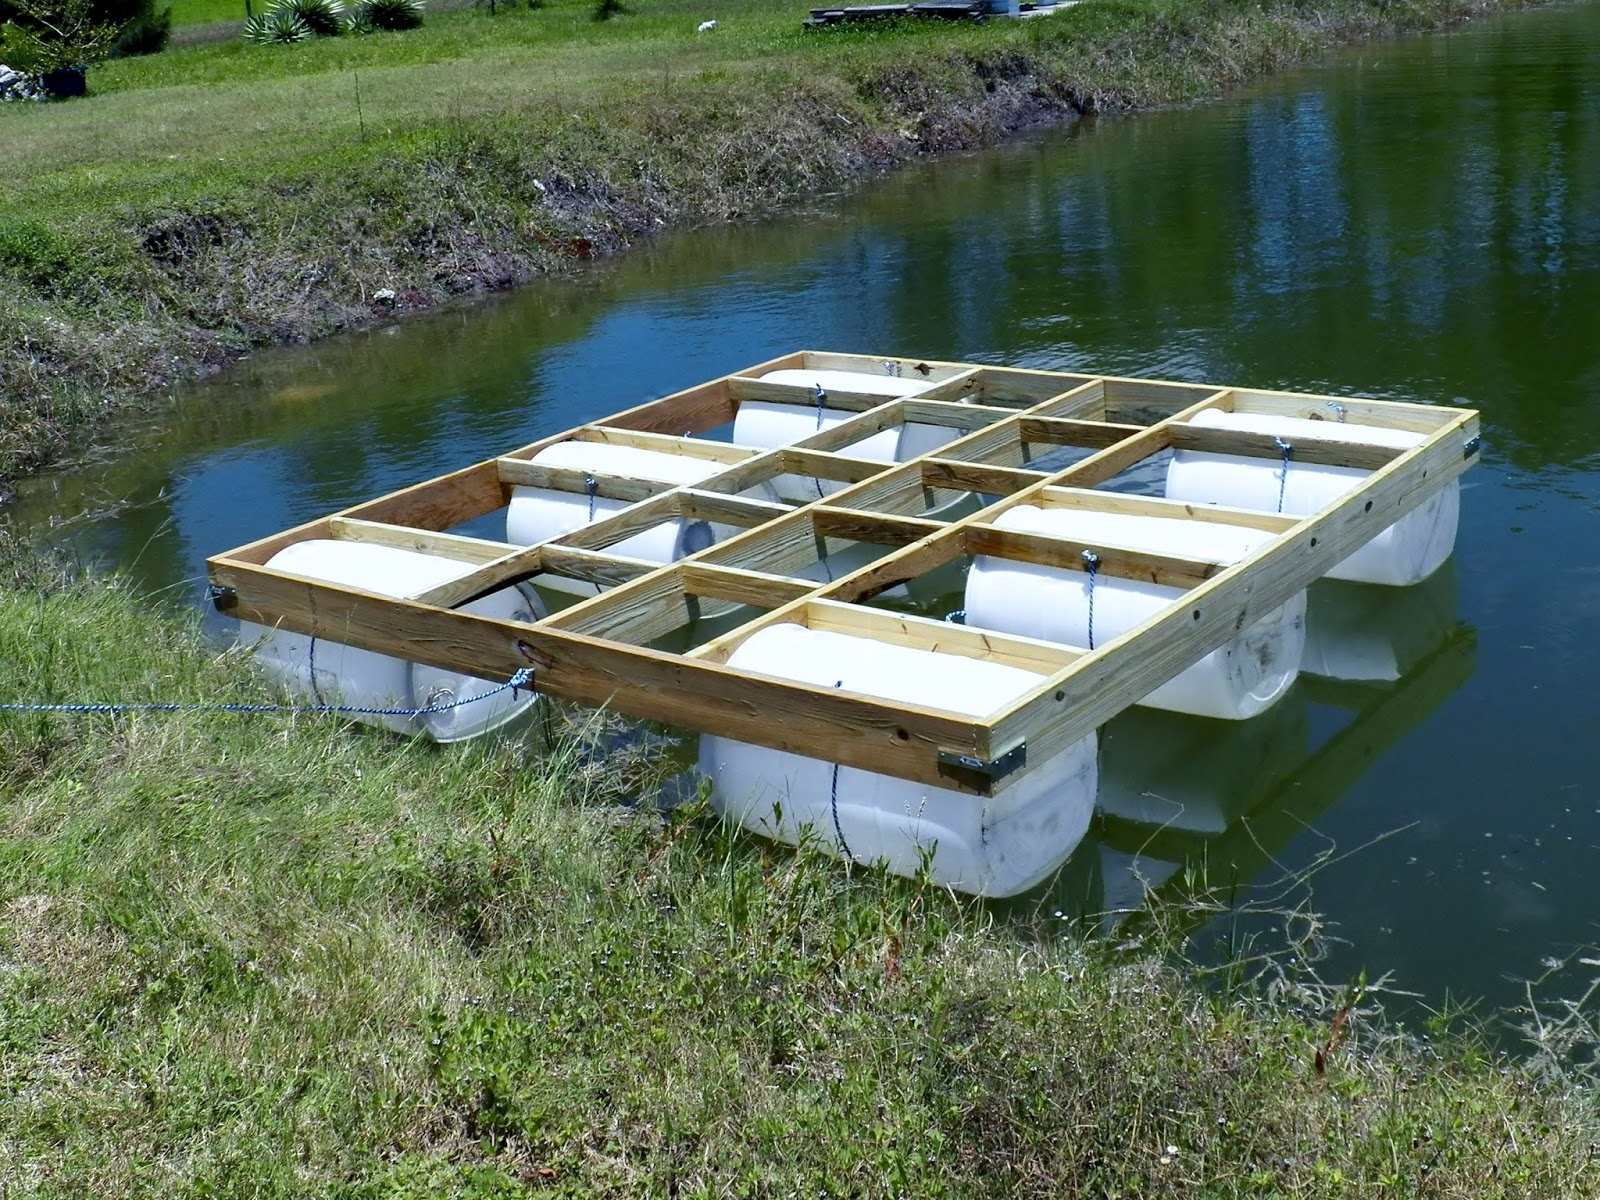 My Backyard: We Built our own Floating Dock